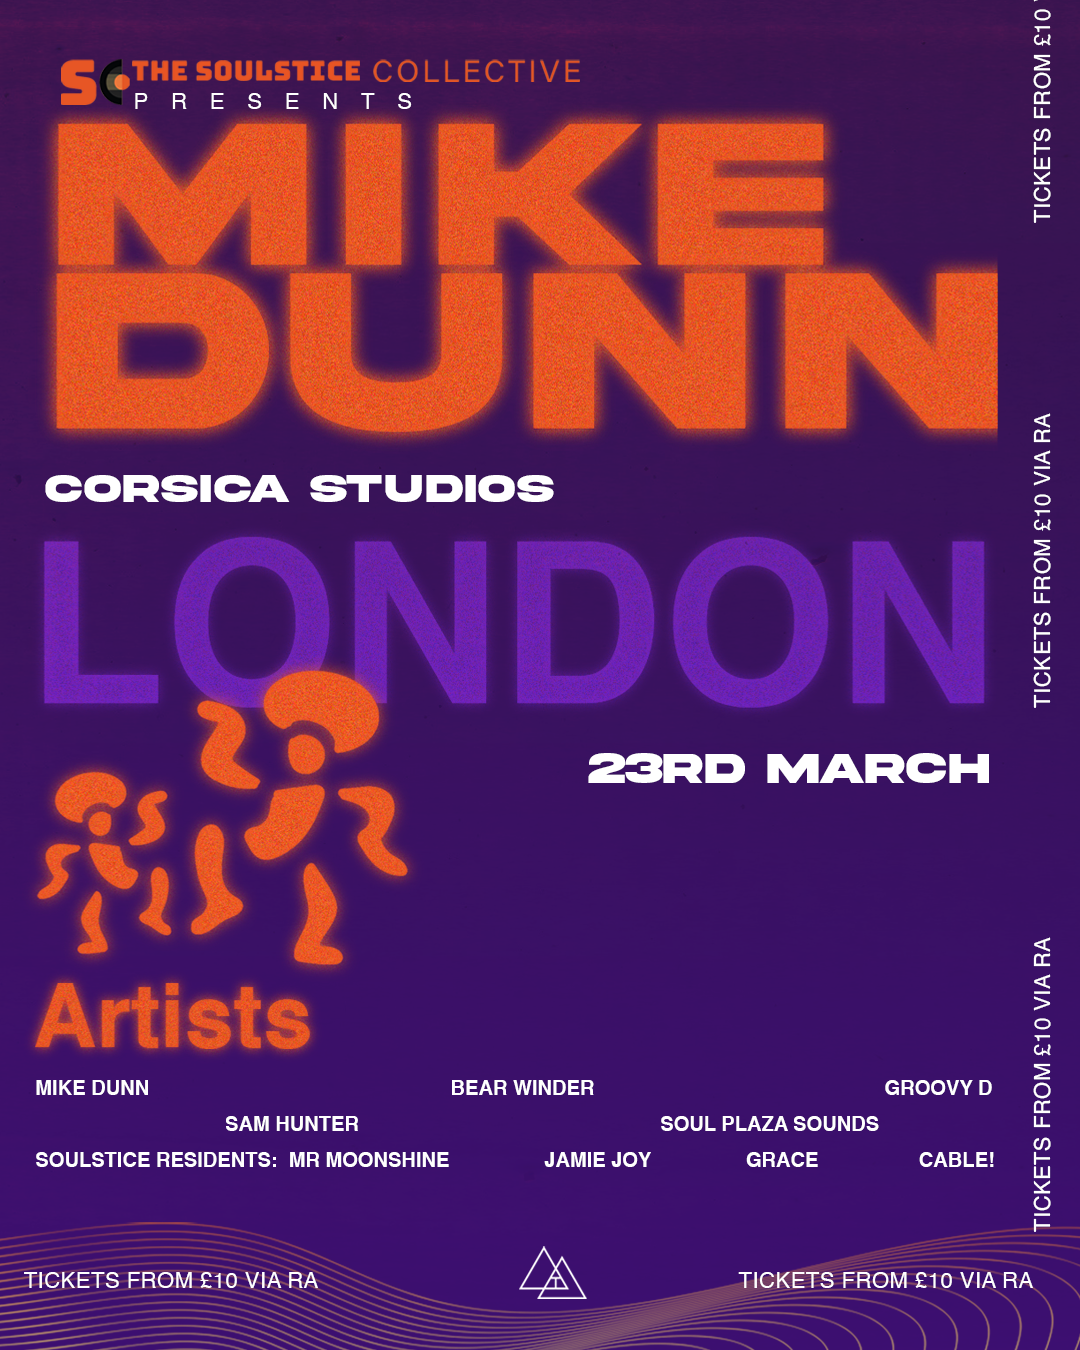 The Soulstice Collective presents: Mike Dunn - フライヤー表